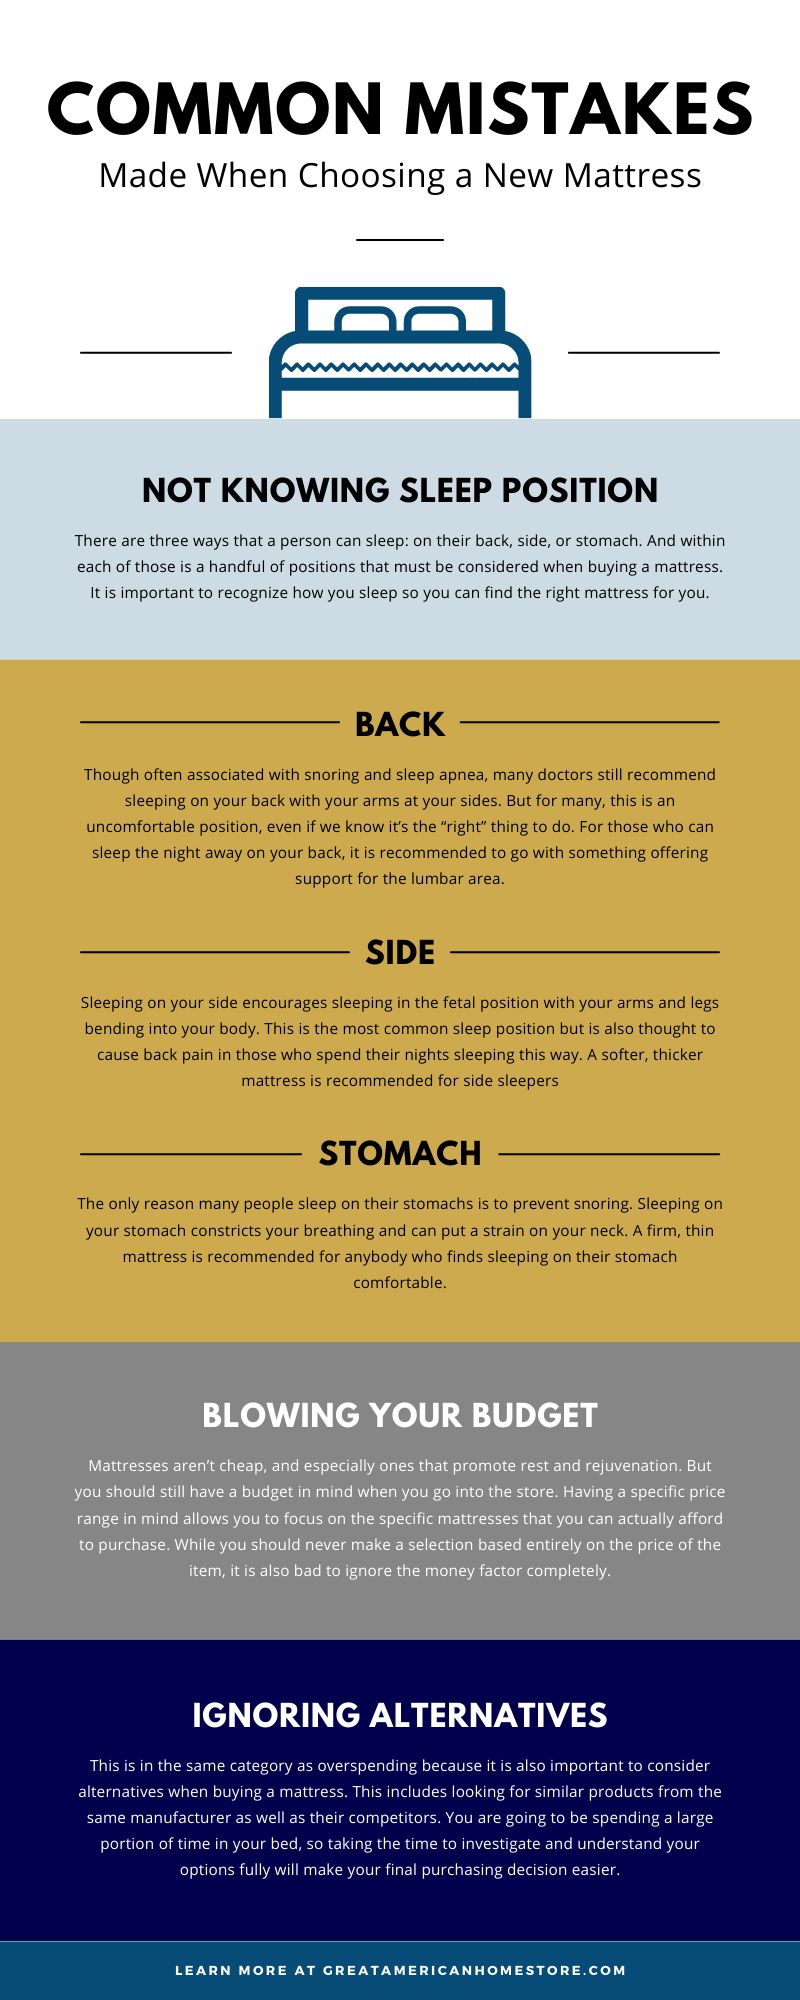 Mattress buying mistakes infographic